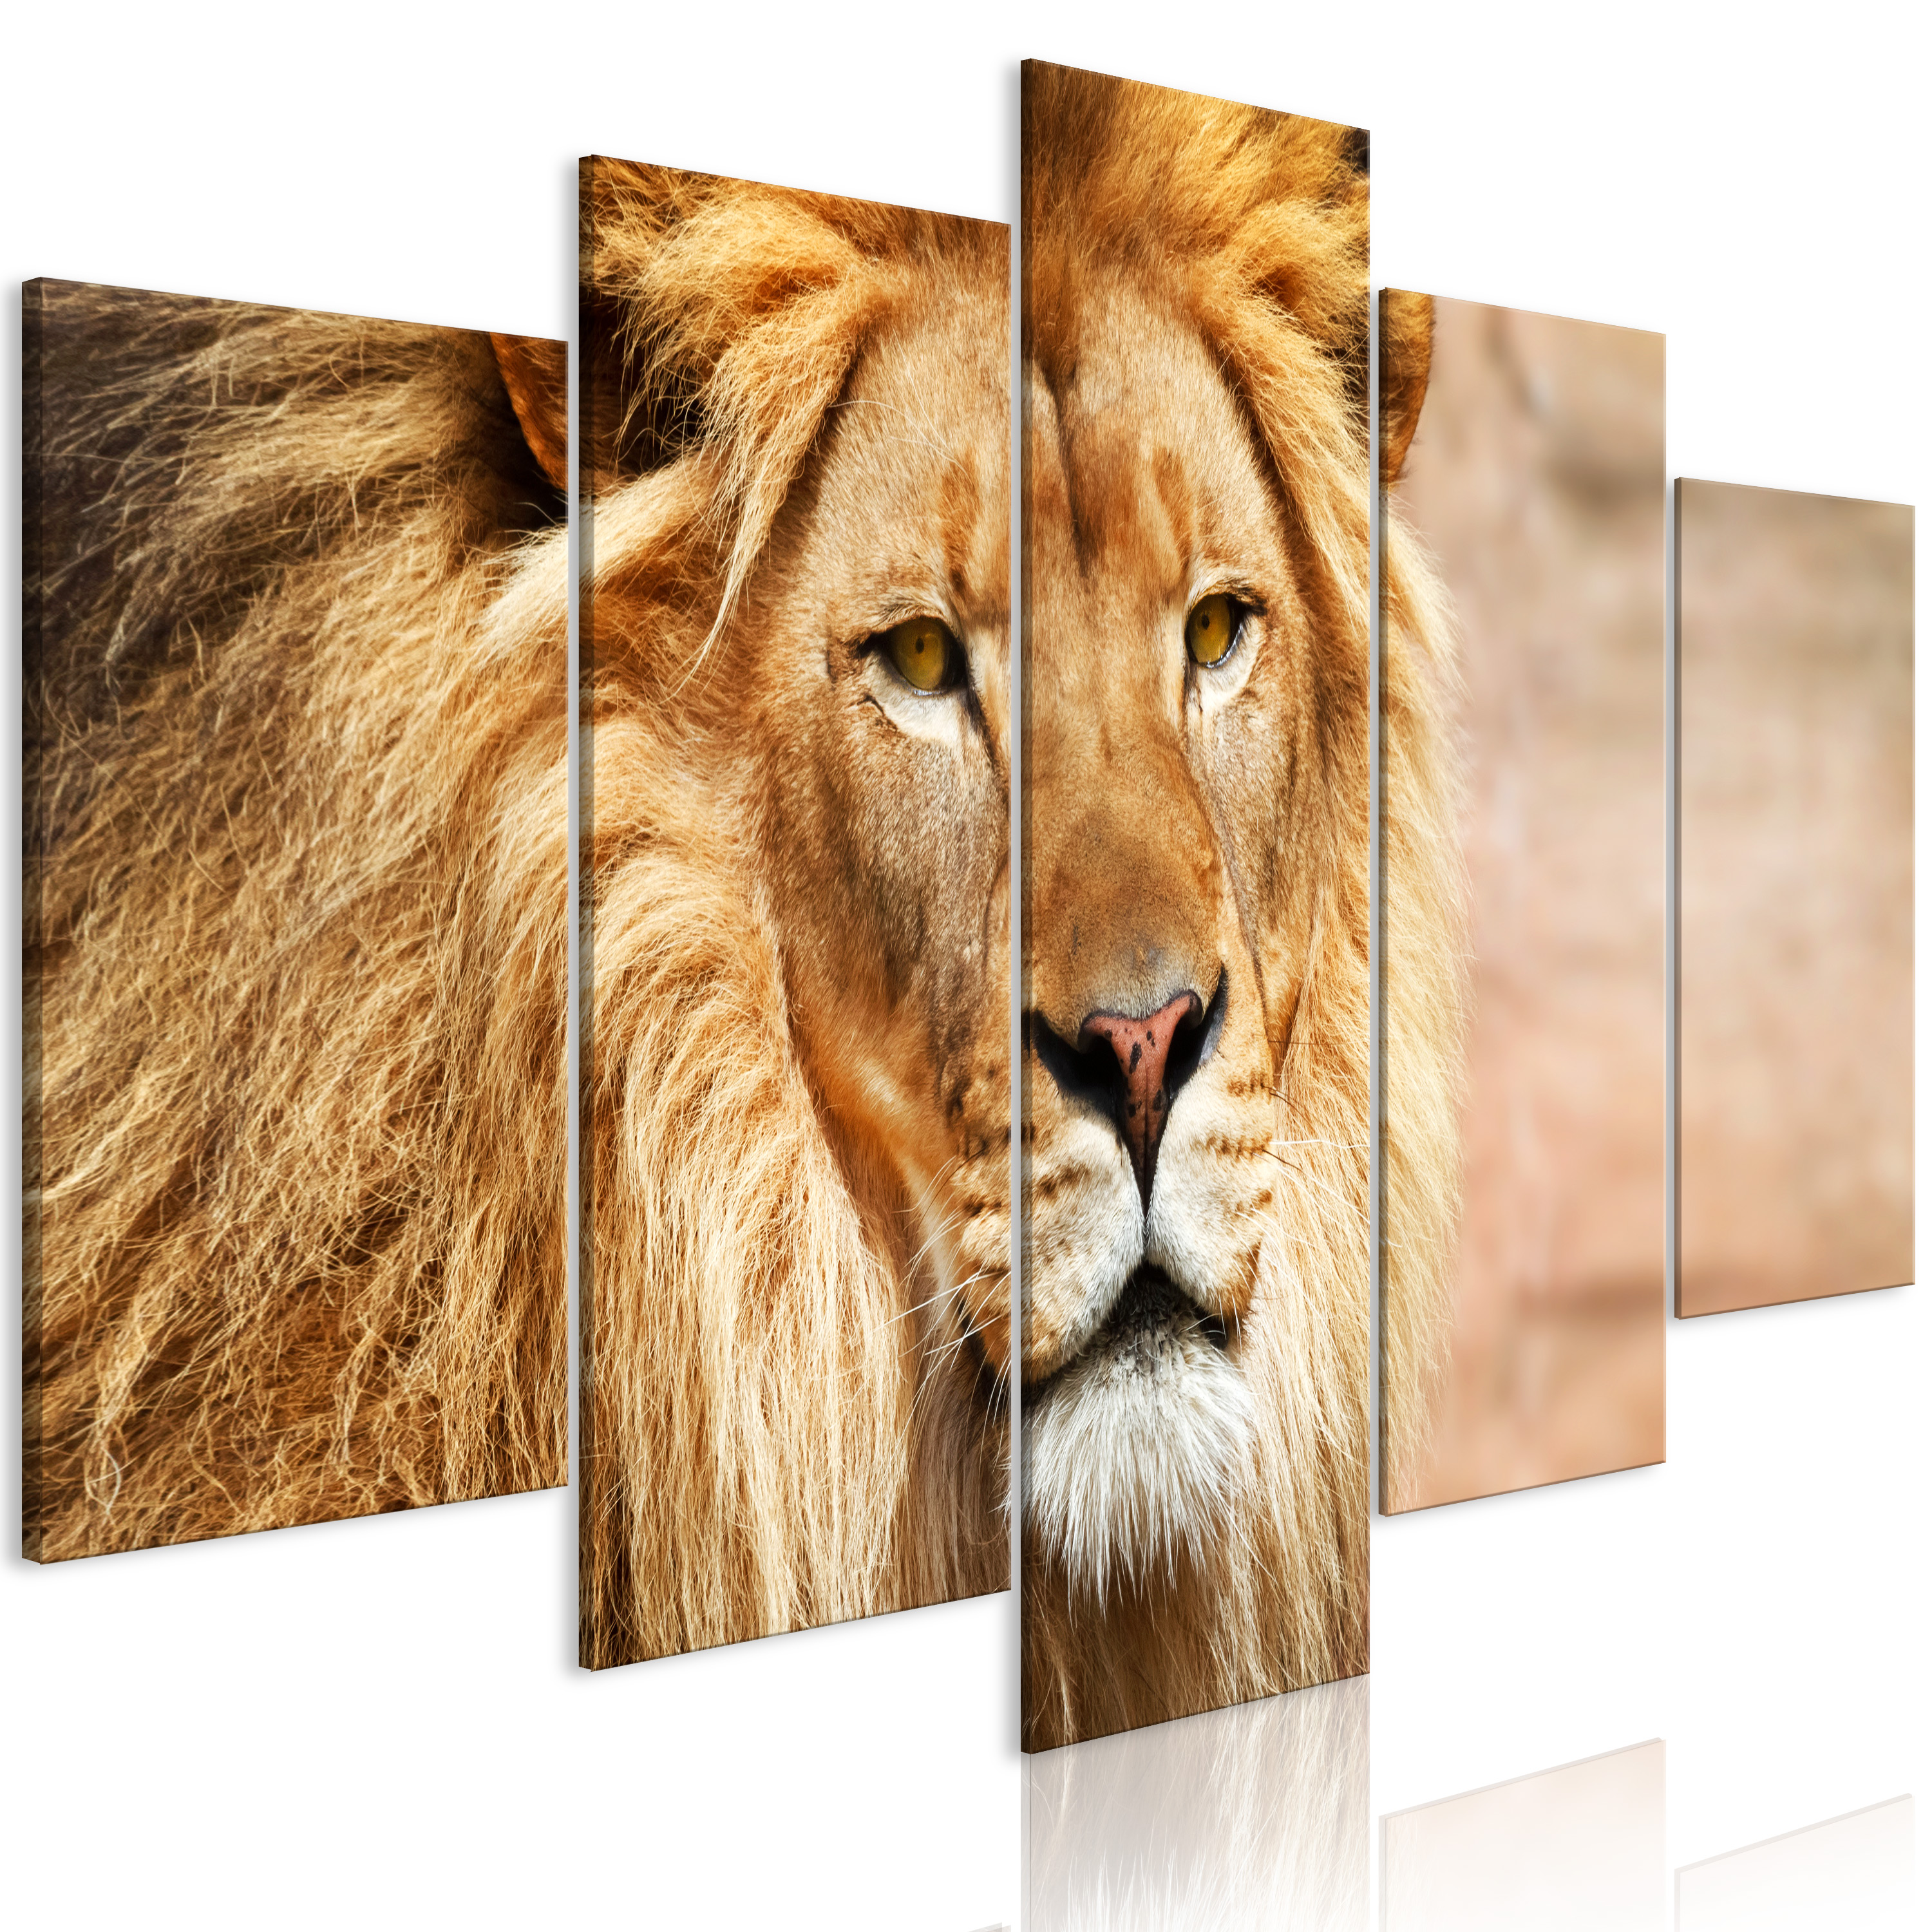 Canvas Print - The King of Beasts (5 Parts) Wide Orange - 200x100